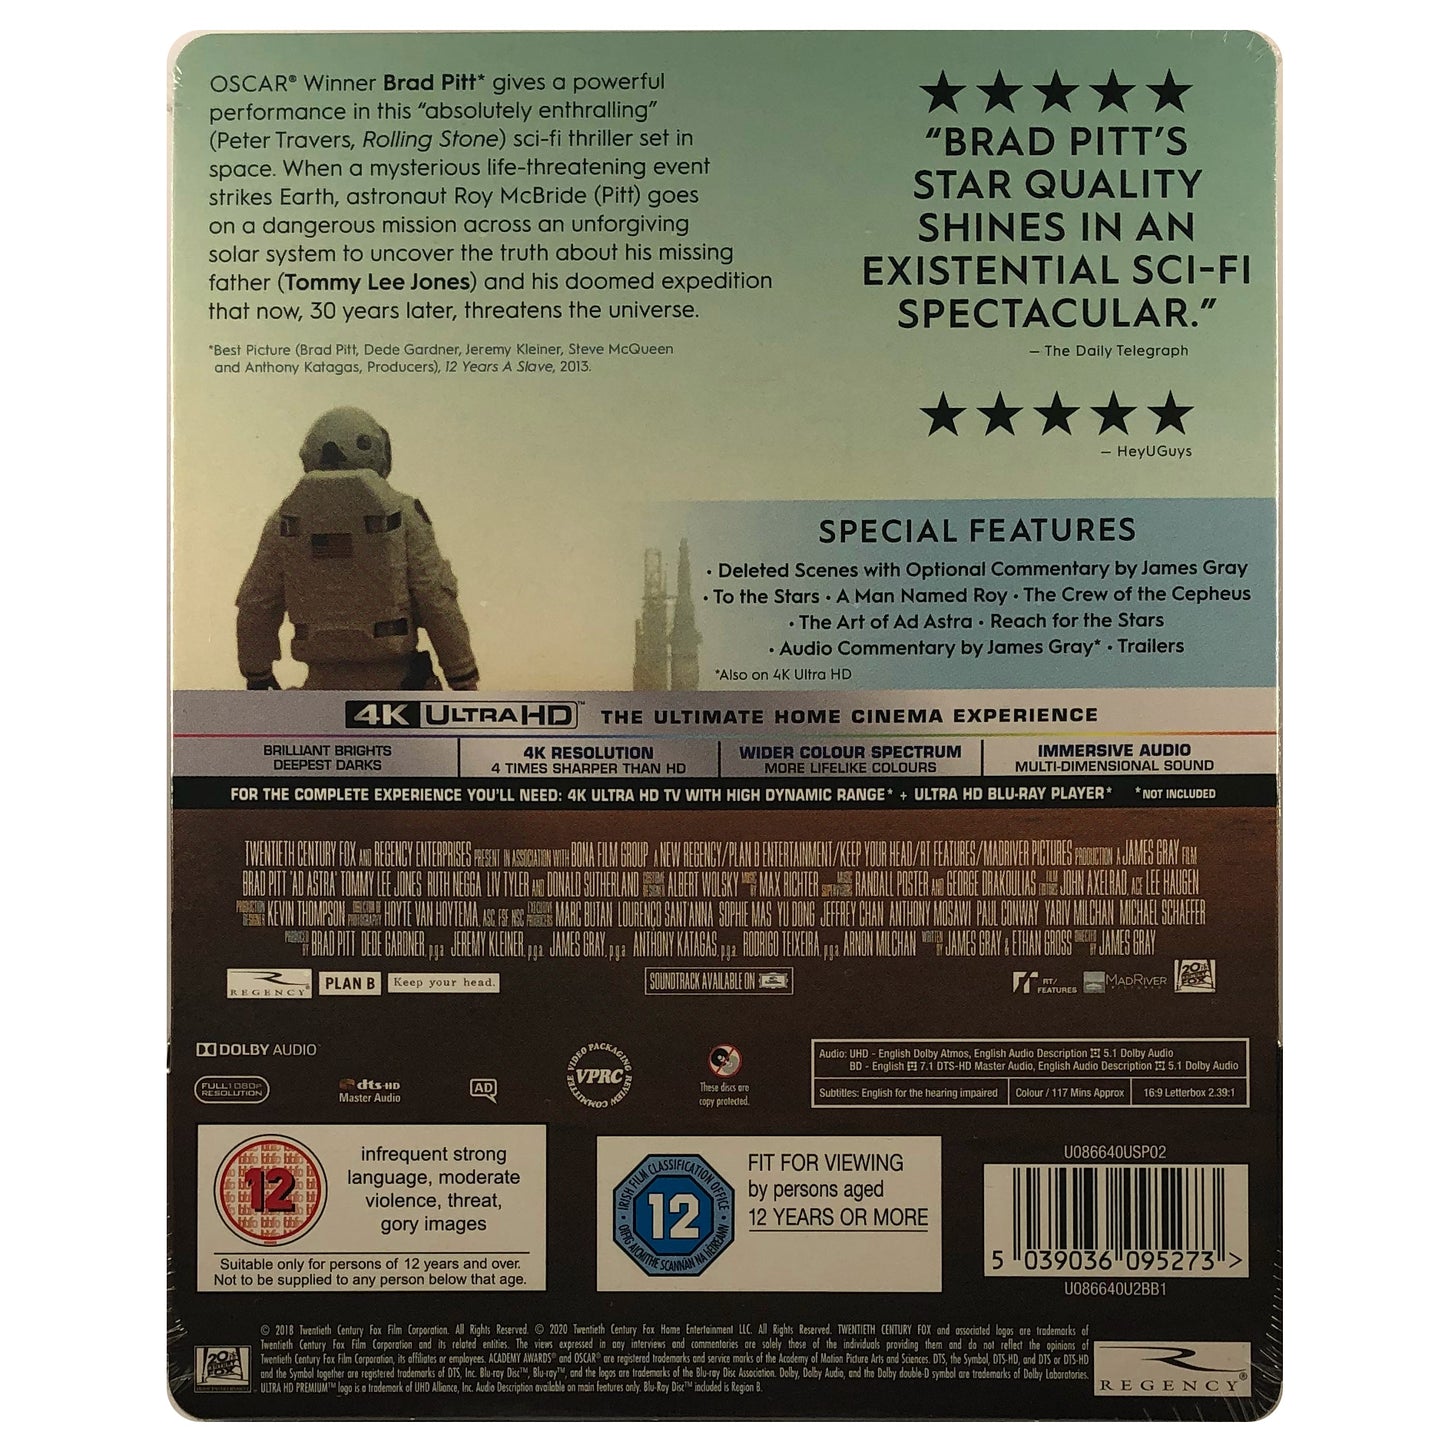 Ad Astra 4K Steelbook *Small Paint Chip*